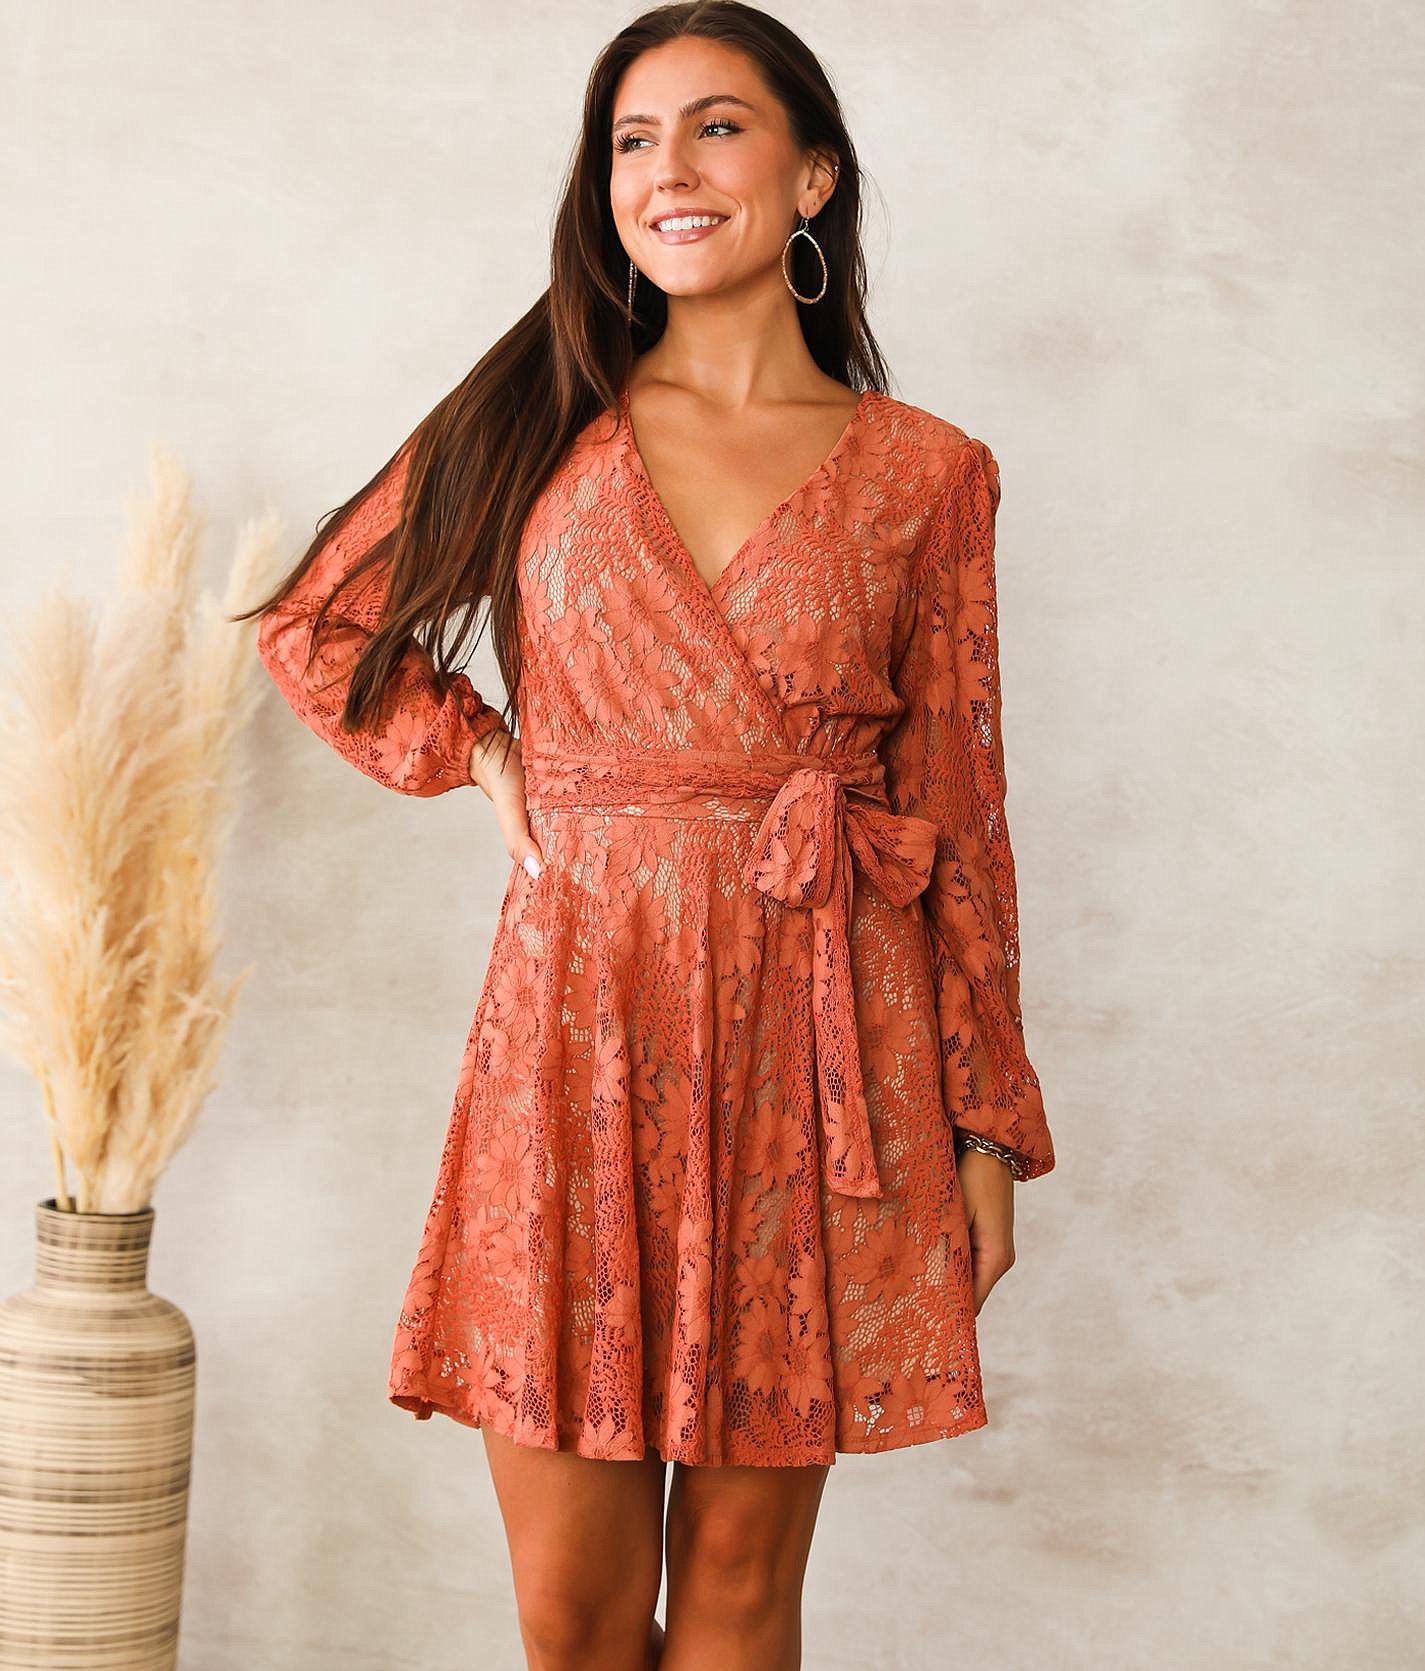 Willow & Root All Over Lace Dress - Women's Dresses in Clay Nude